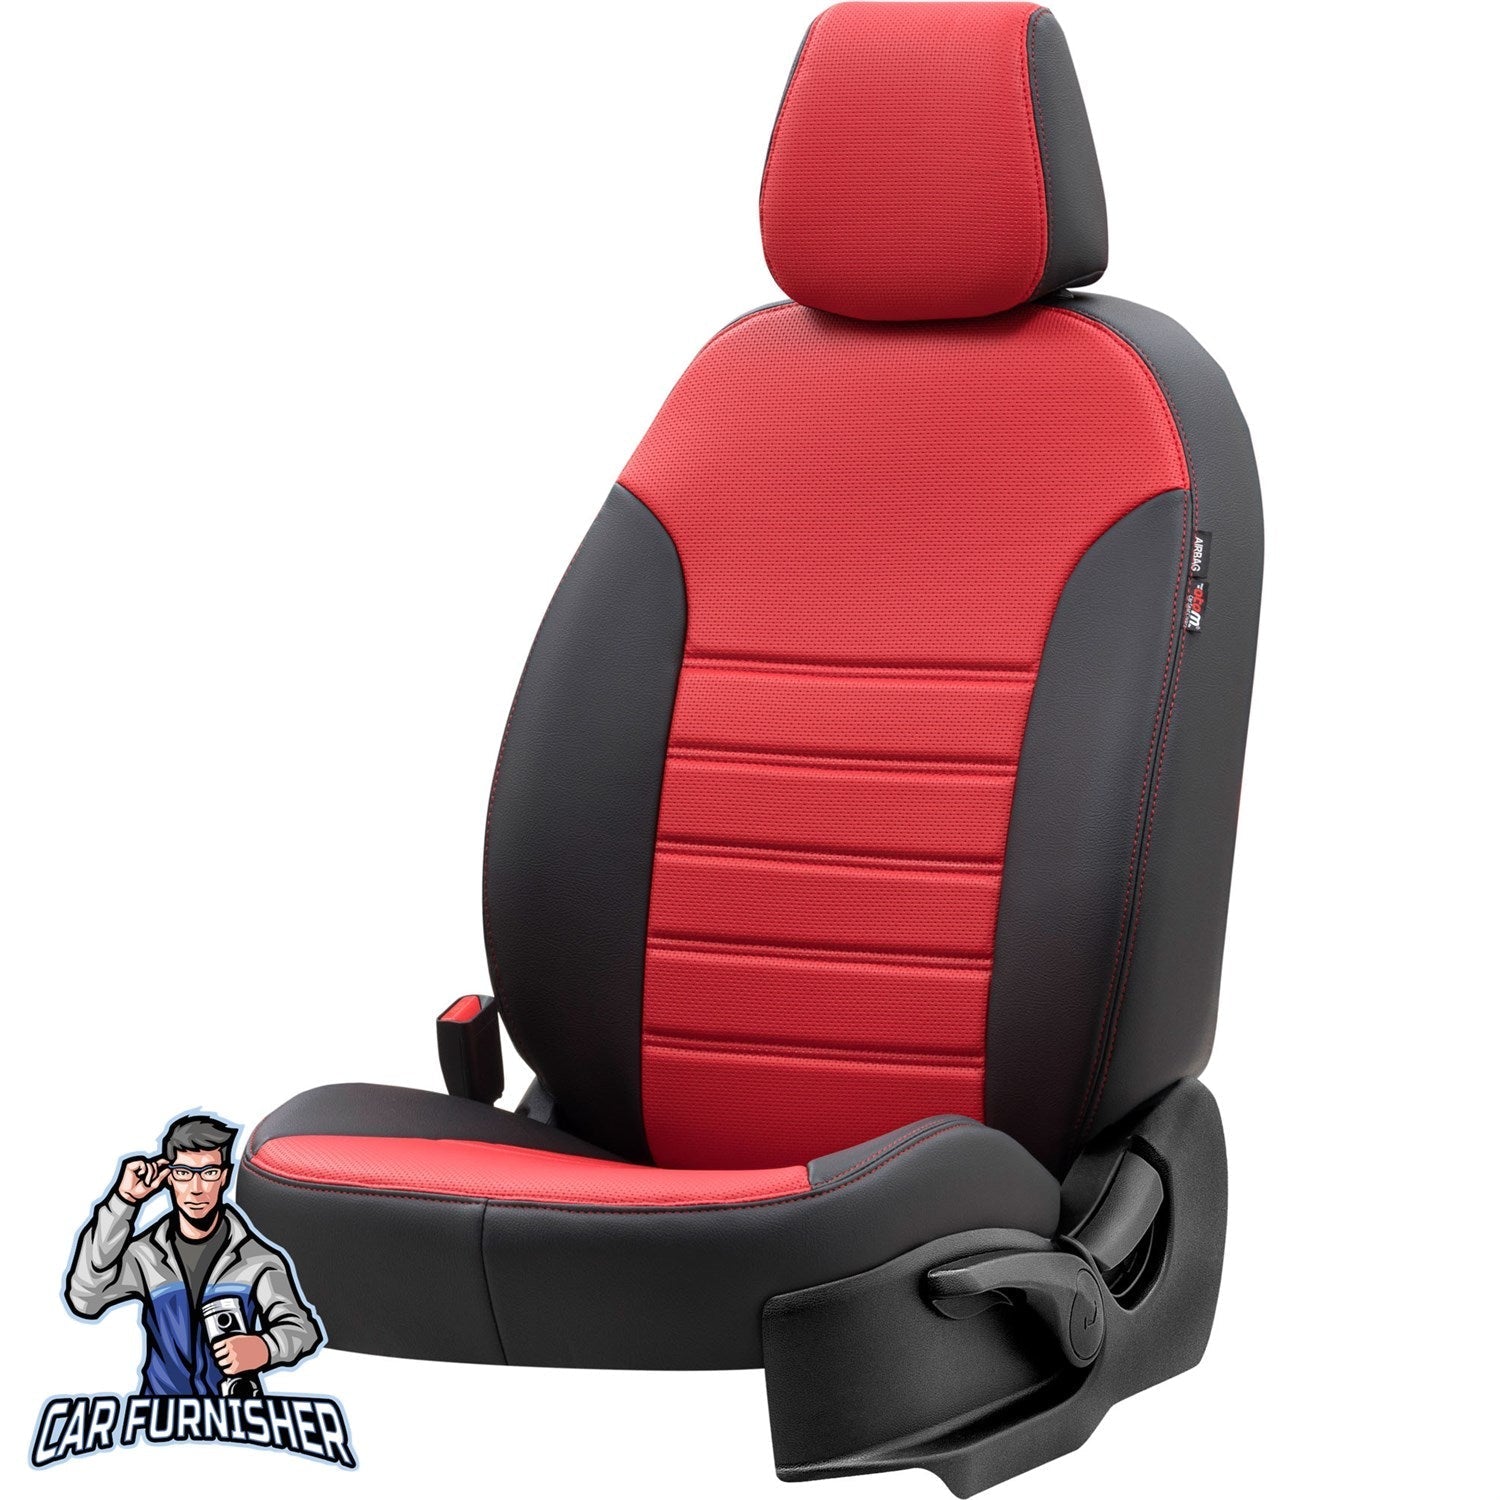 Fiat Linea Seat Covers New York Leather Design Red Leather